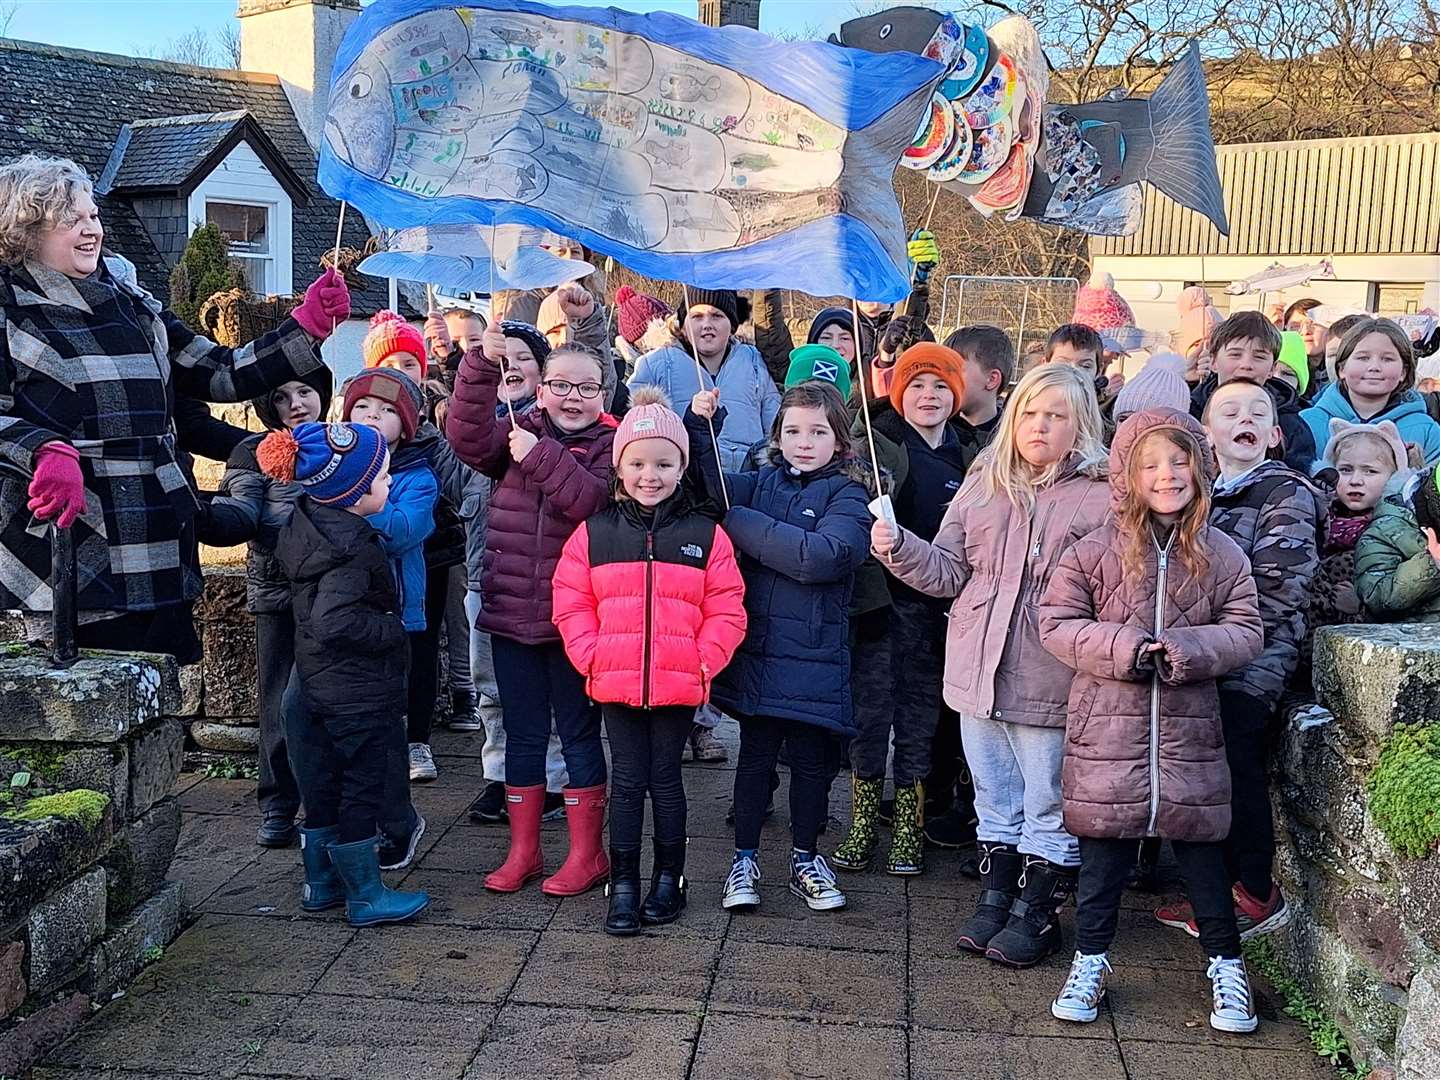 Pupils from Helmsdale Primary School marched behind the pipe band, waving banners they had made with salmon on them.